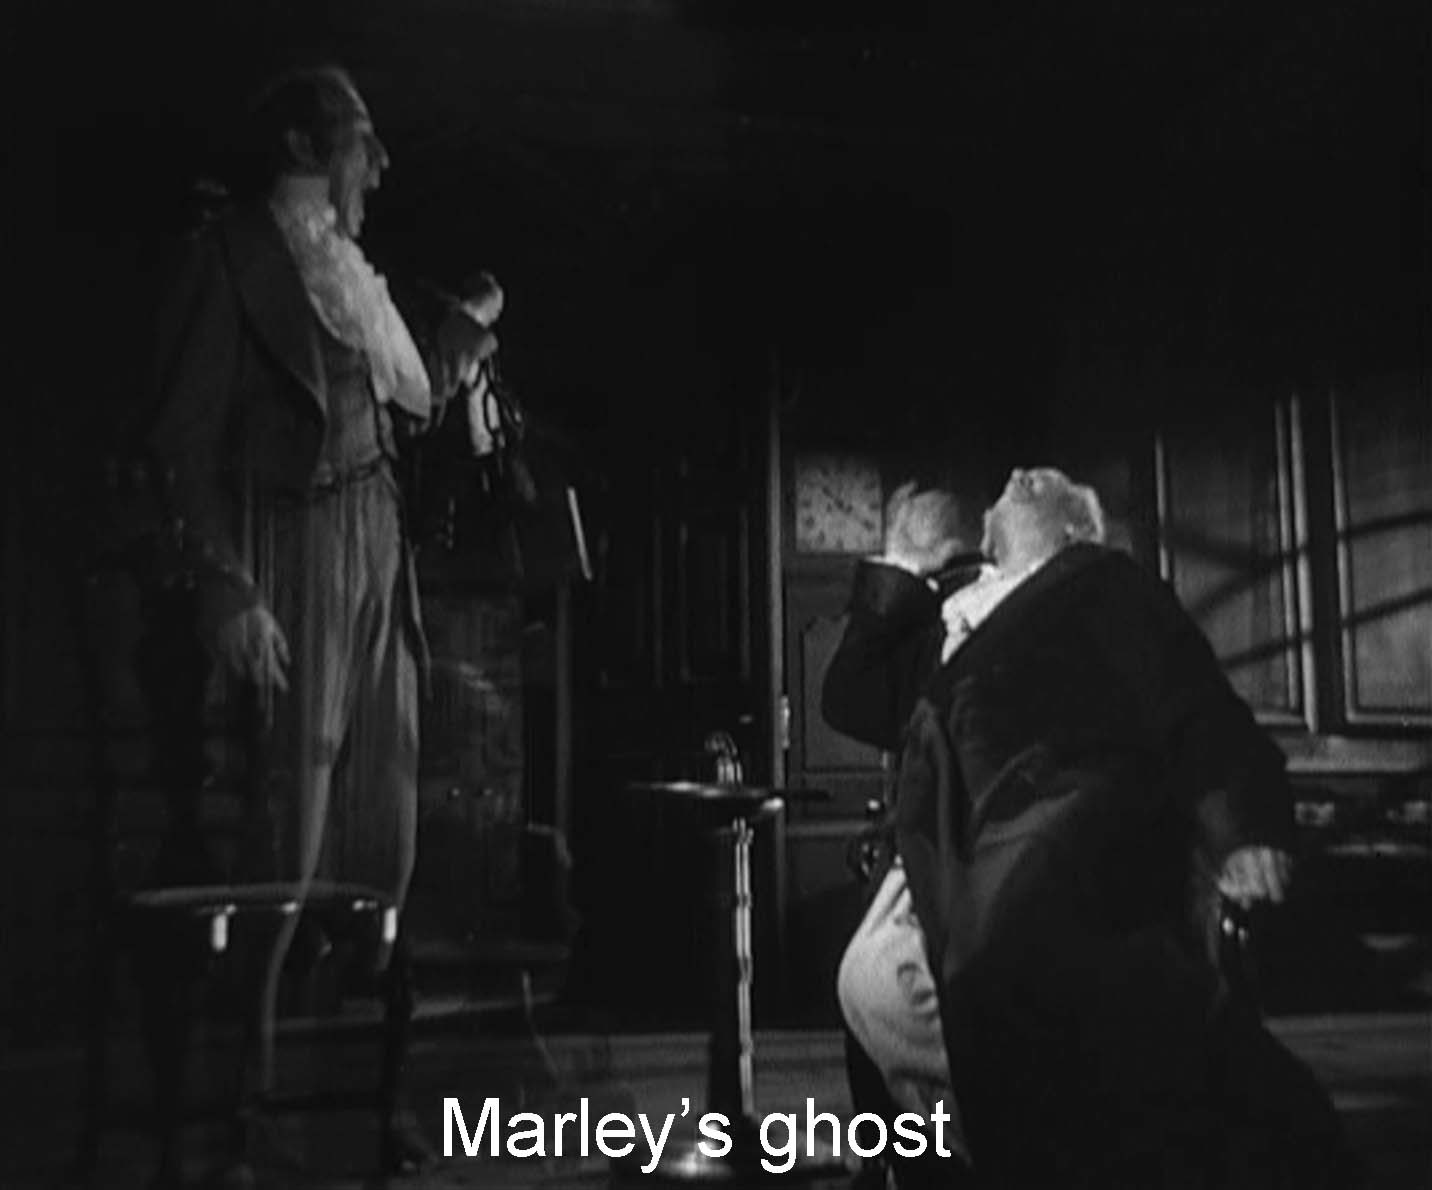 Marley's ghost